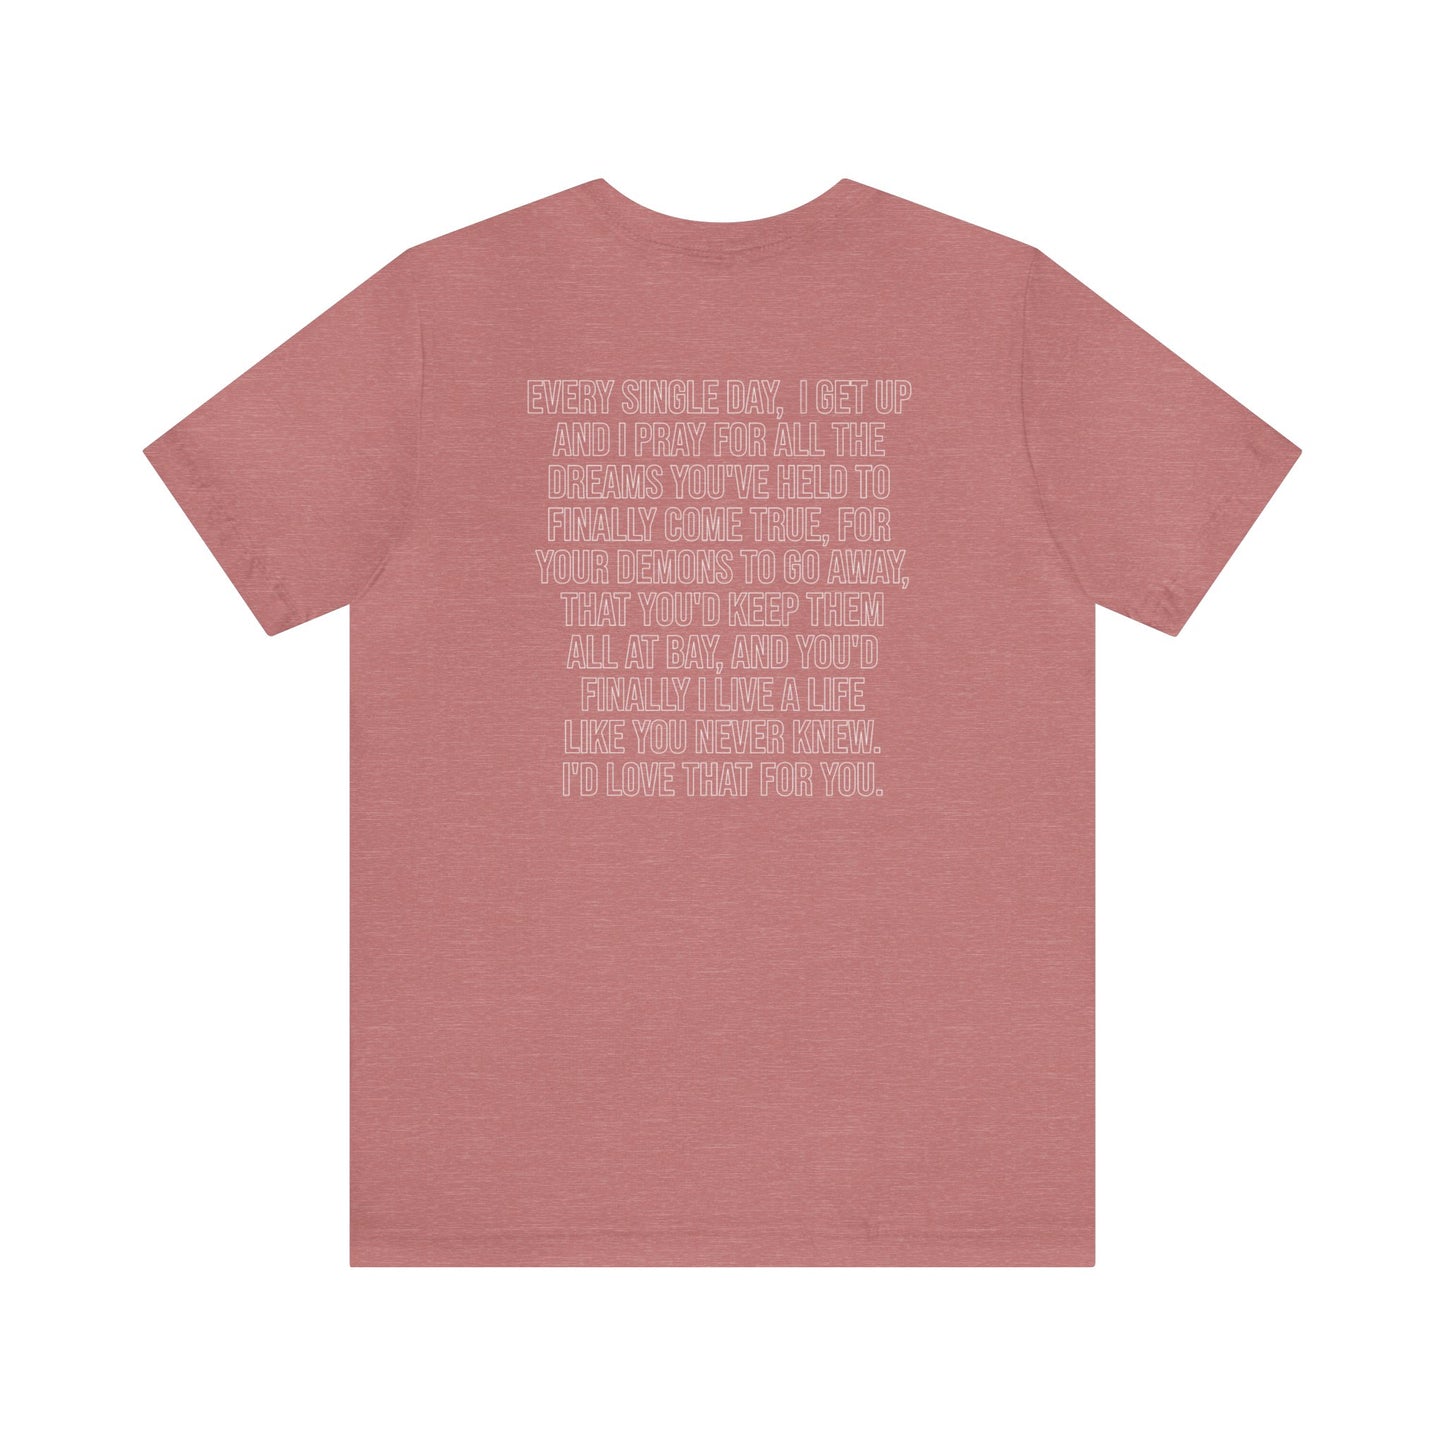 "I Love That For You" Unisex Jersey Short Sleeve Tee